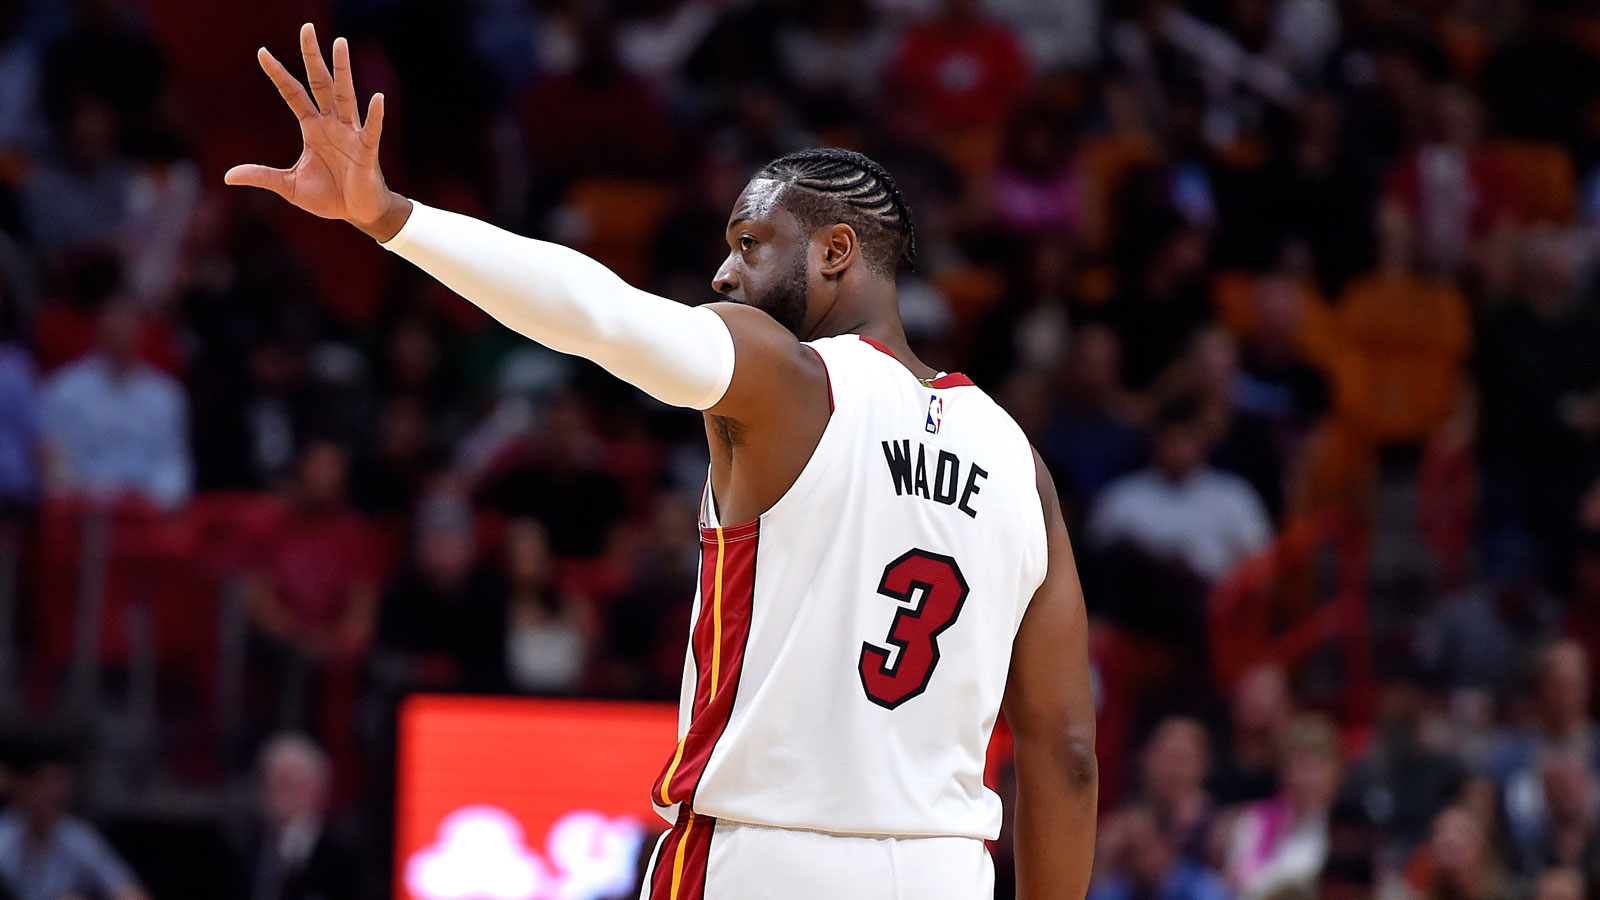 Dwyane Wade's final game in Miami was a night to remember